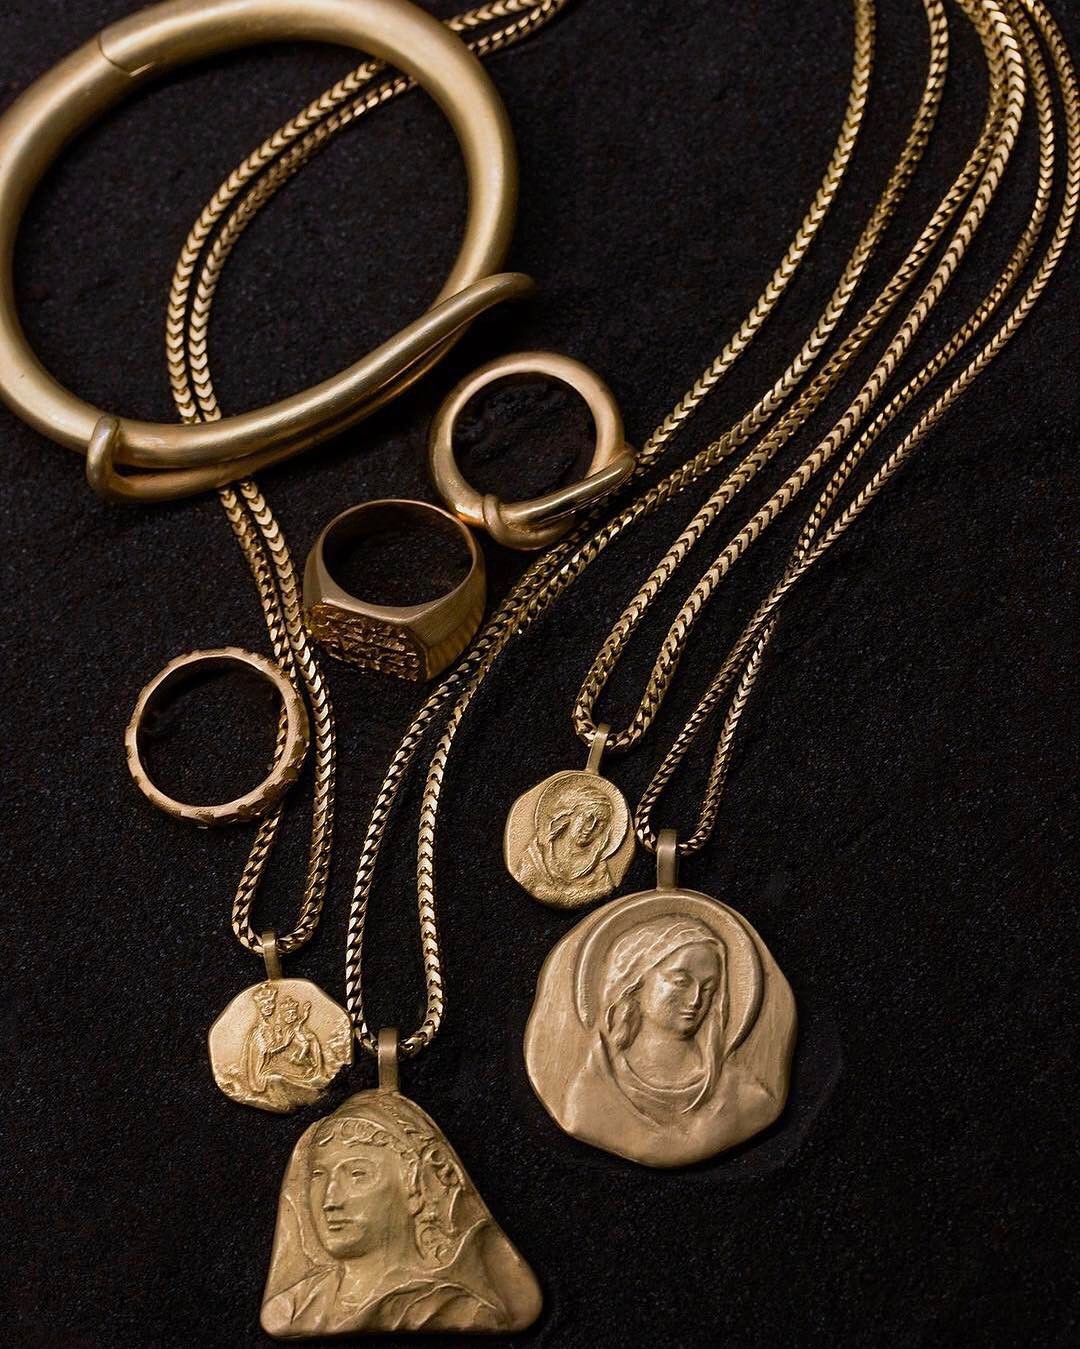 A Closer Look At The Yeezy Season 4 Jewellery Line